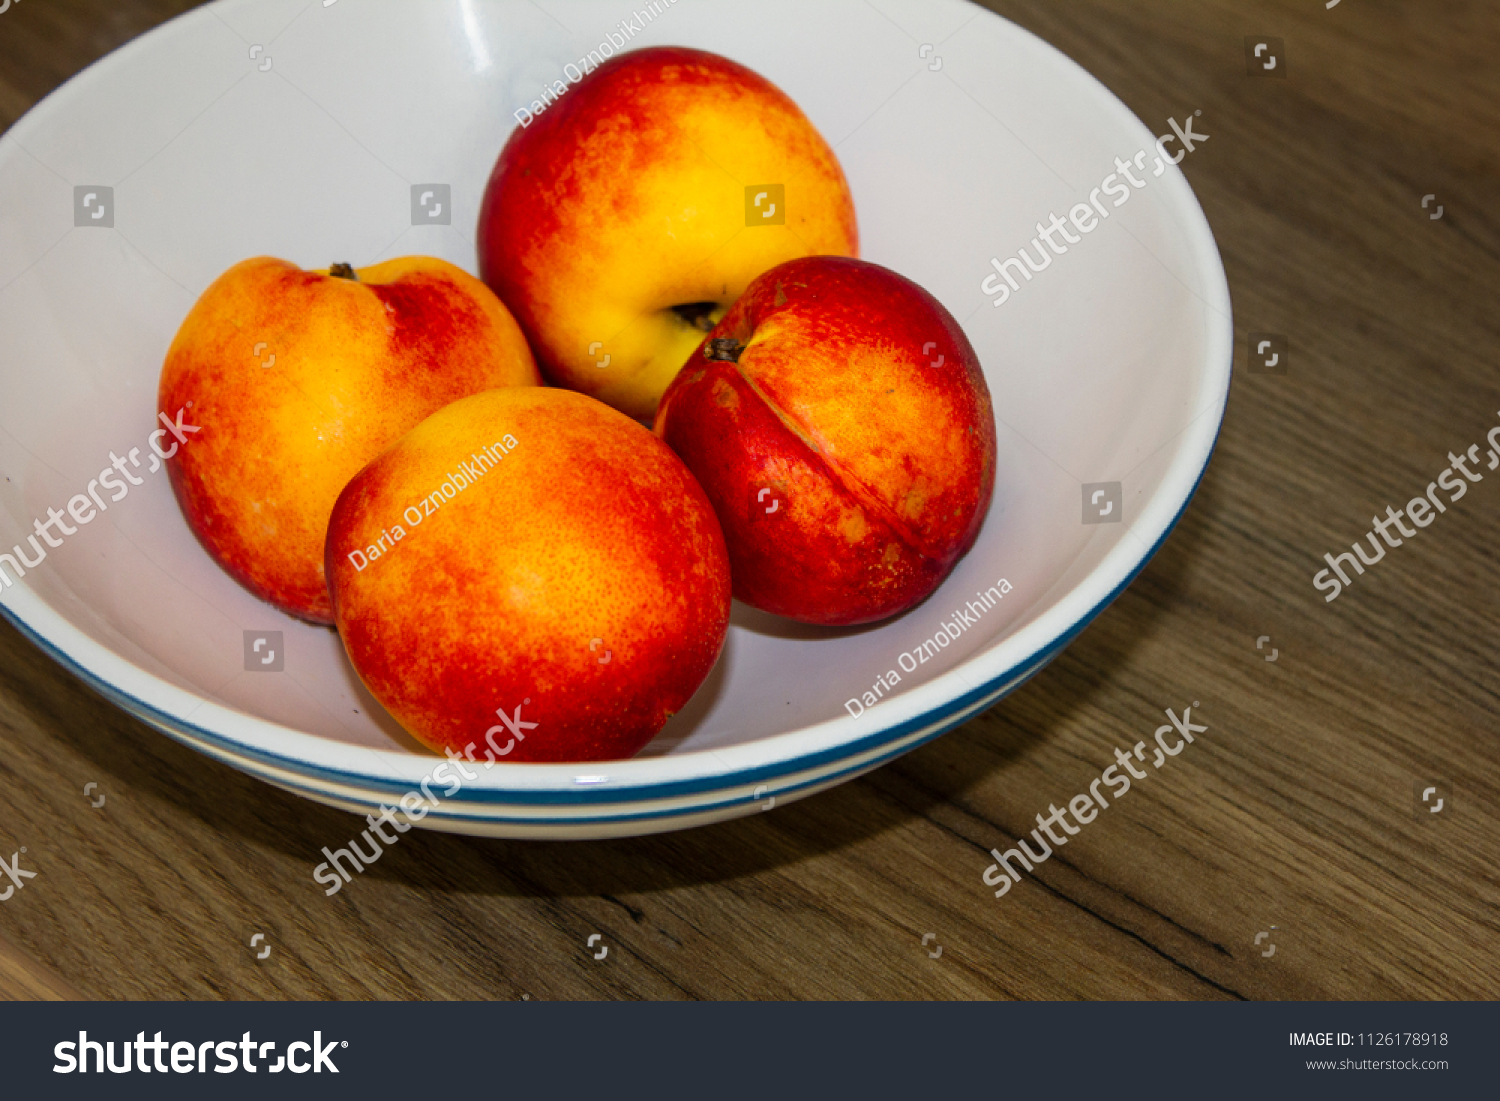 several bright juicy nectarines in the white bowl on wooden table #1126178918